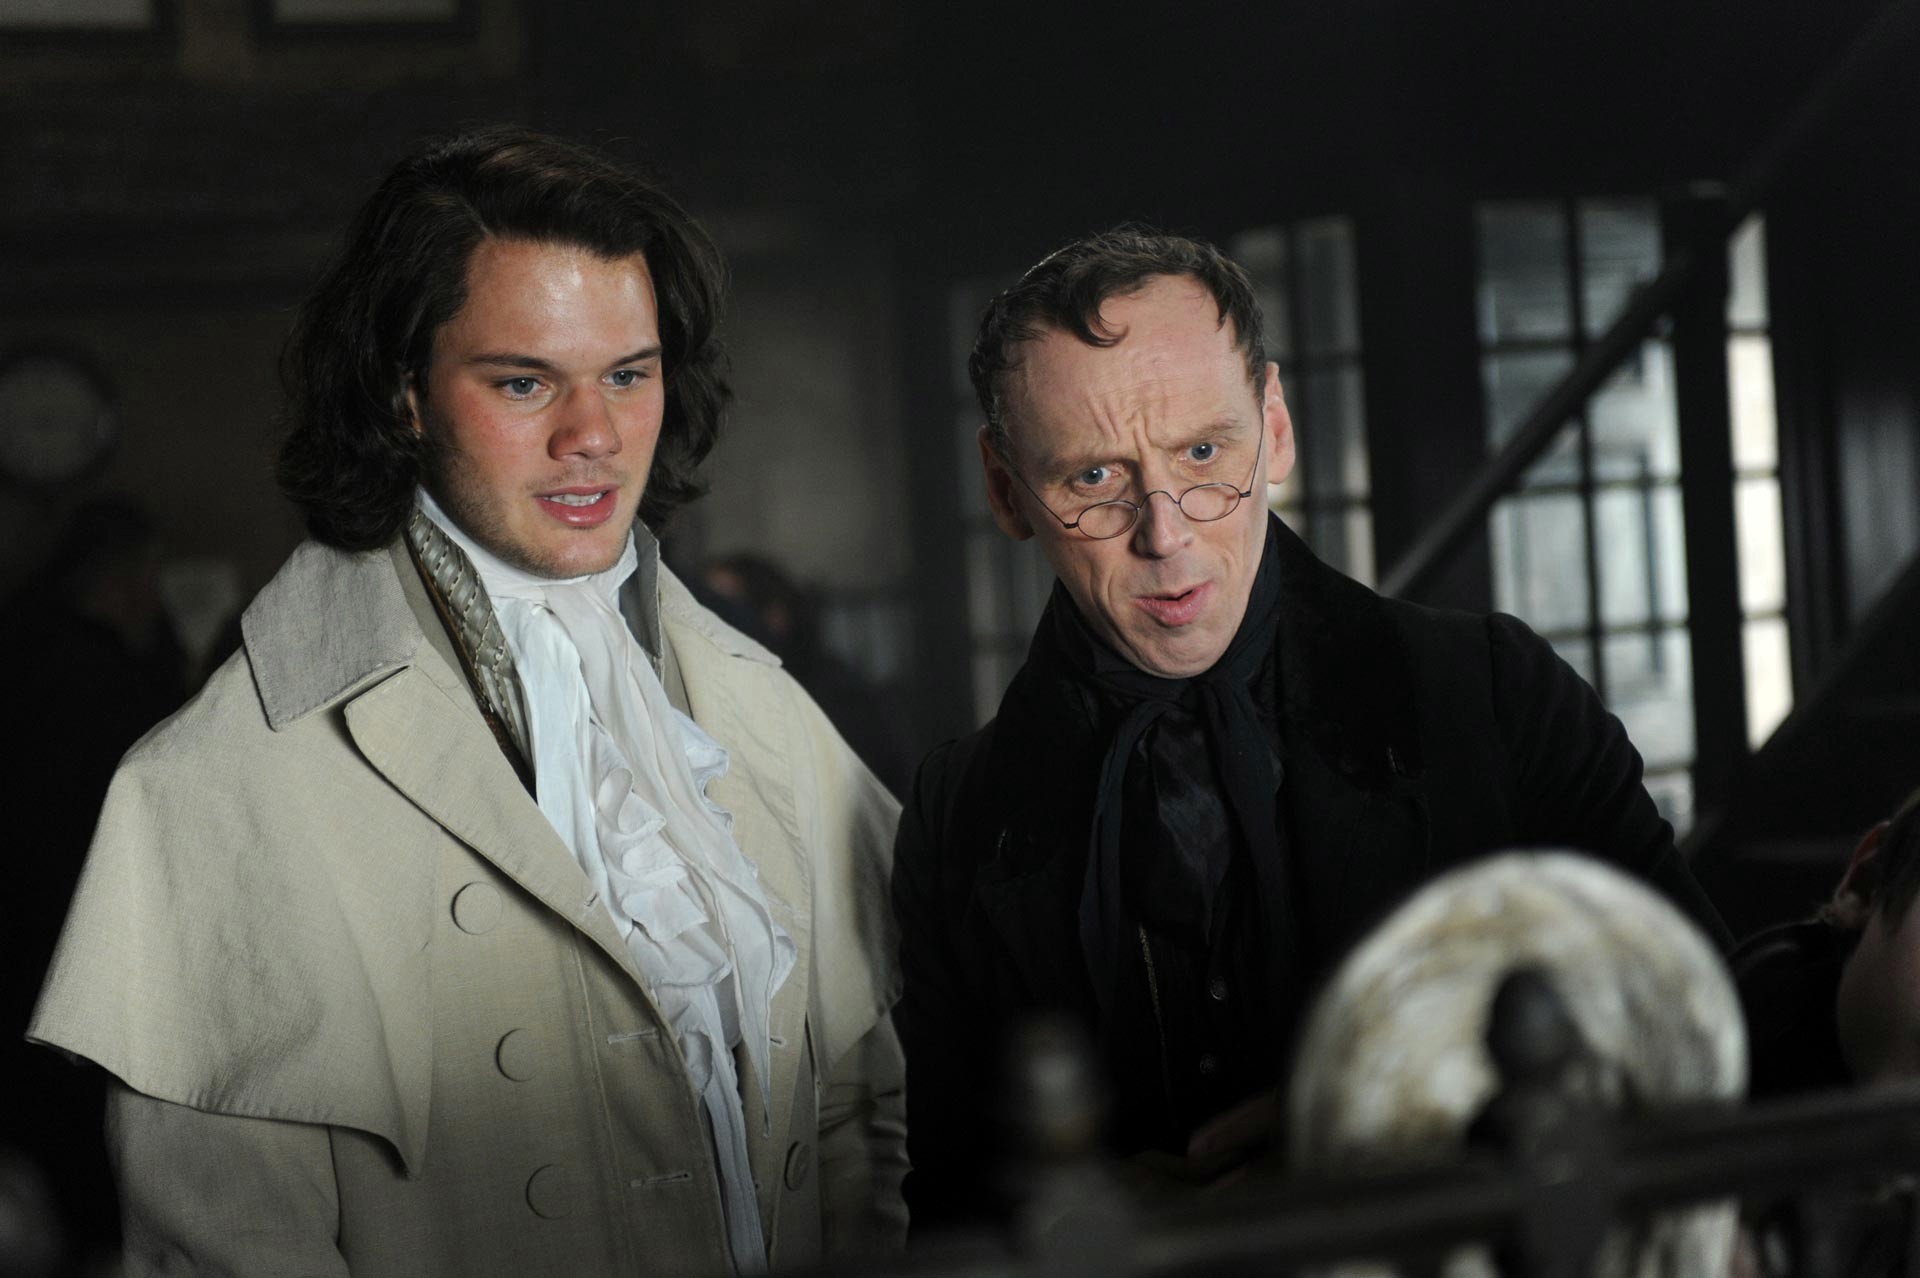 Jeremy Irvine stars as Pip and Ewen Bremner stars as Wemmick in Main Street Films' Great Expectations (2013)